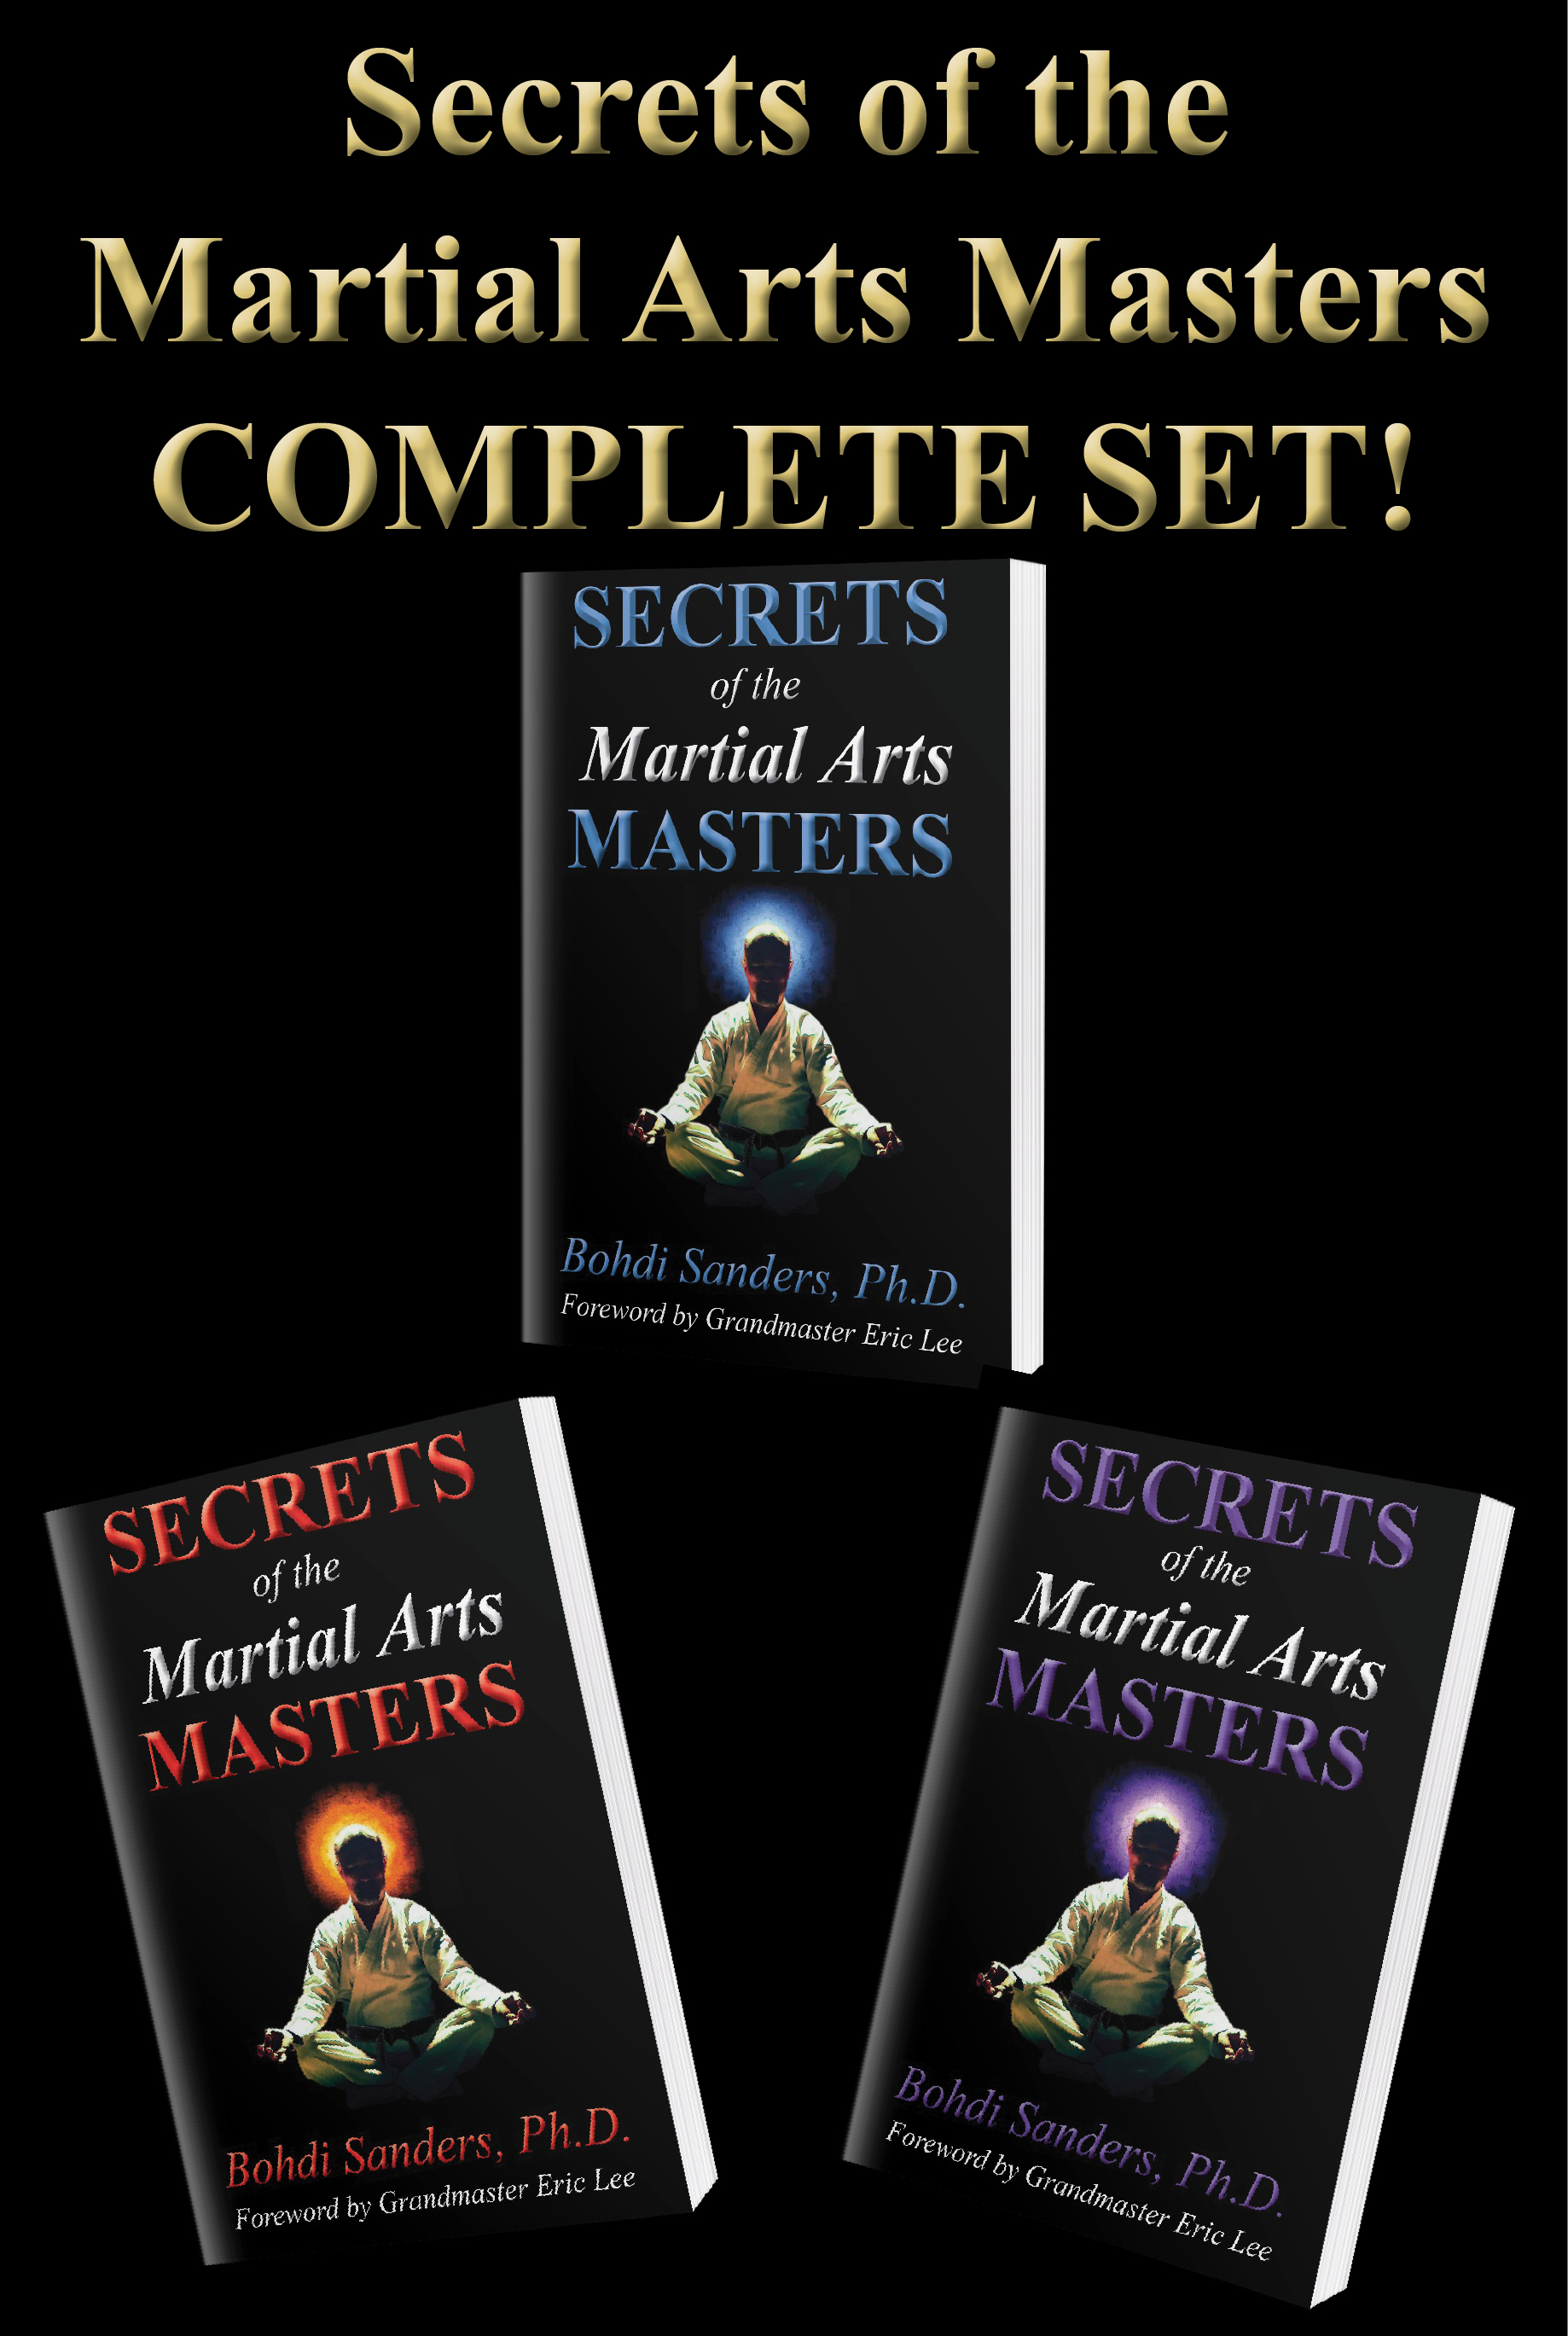 Secrets of the Martial Arts Masters Complete Set by Bohdi Sanders